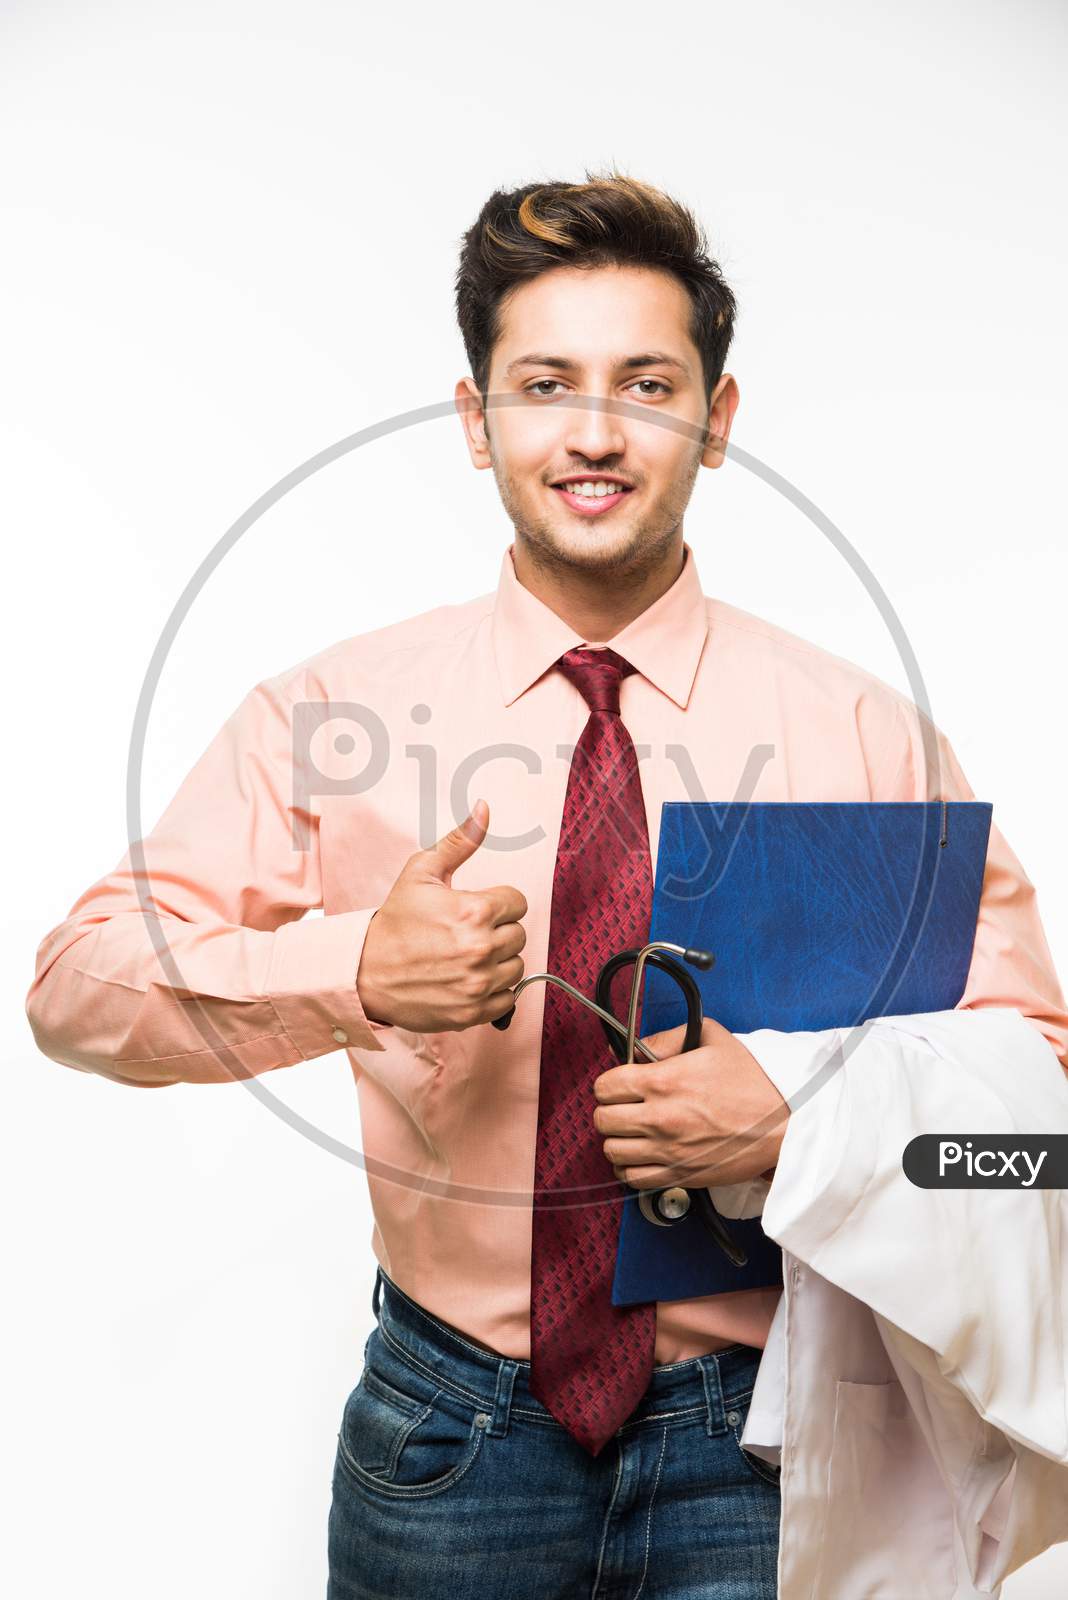 Young male doctor / nurse with stethoscope, standing isolated over white background